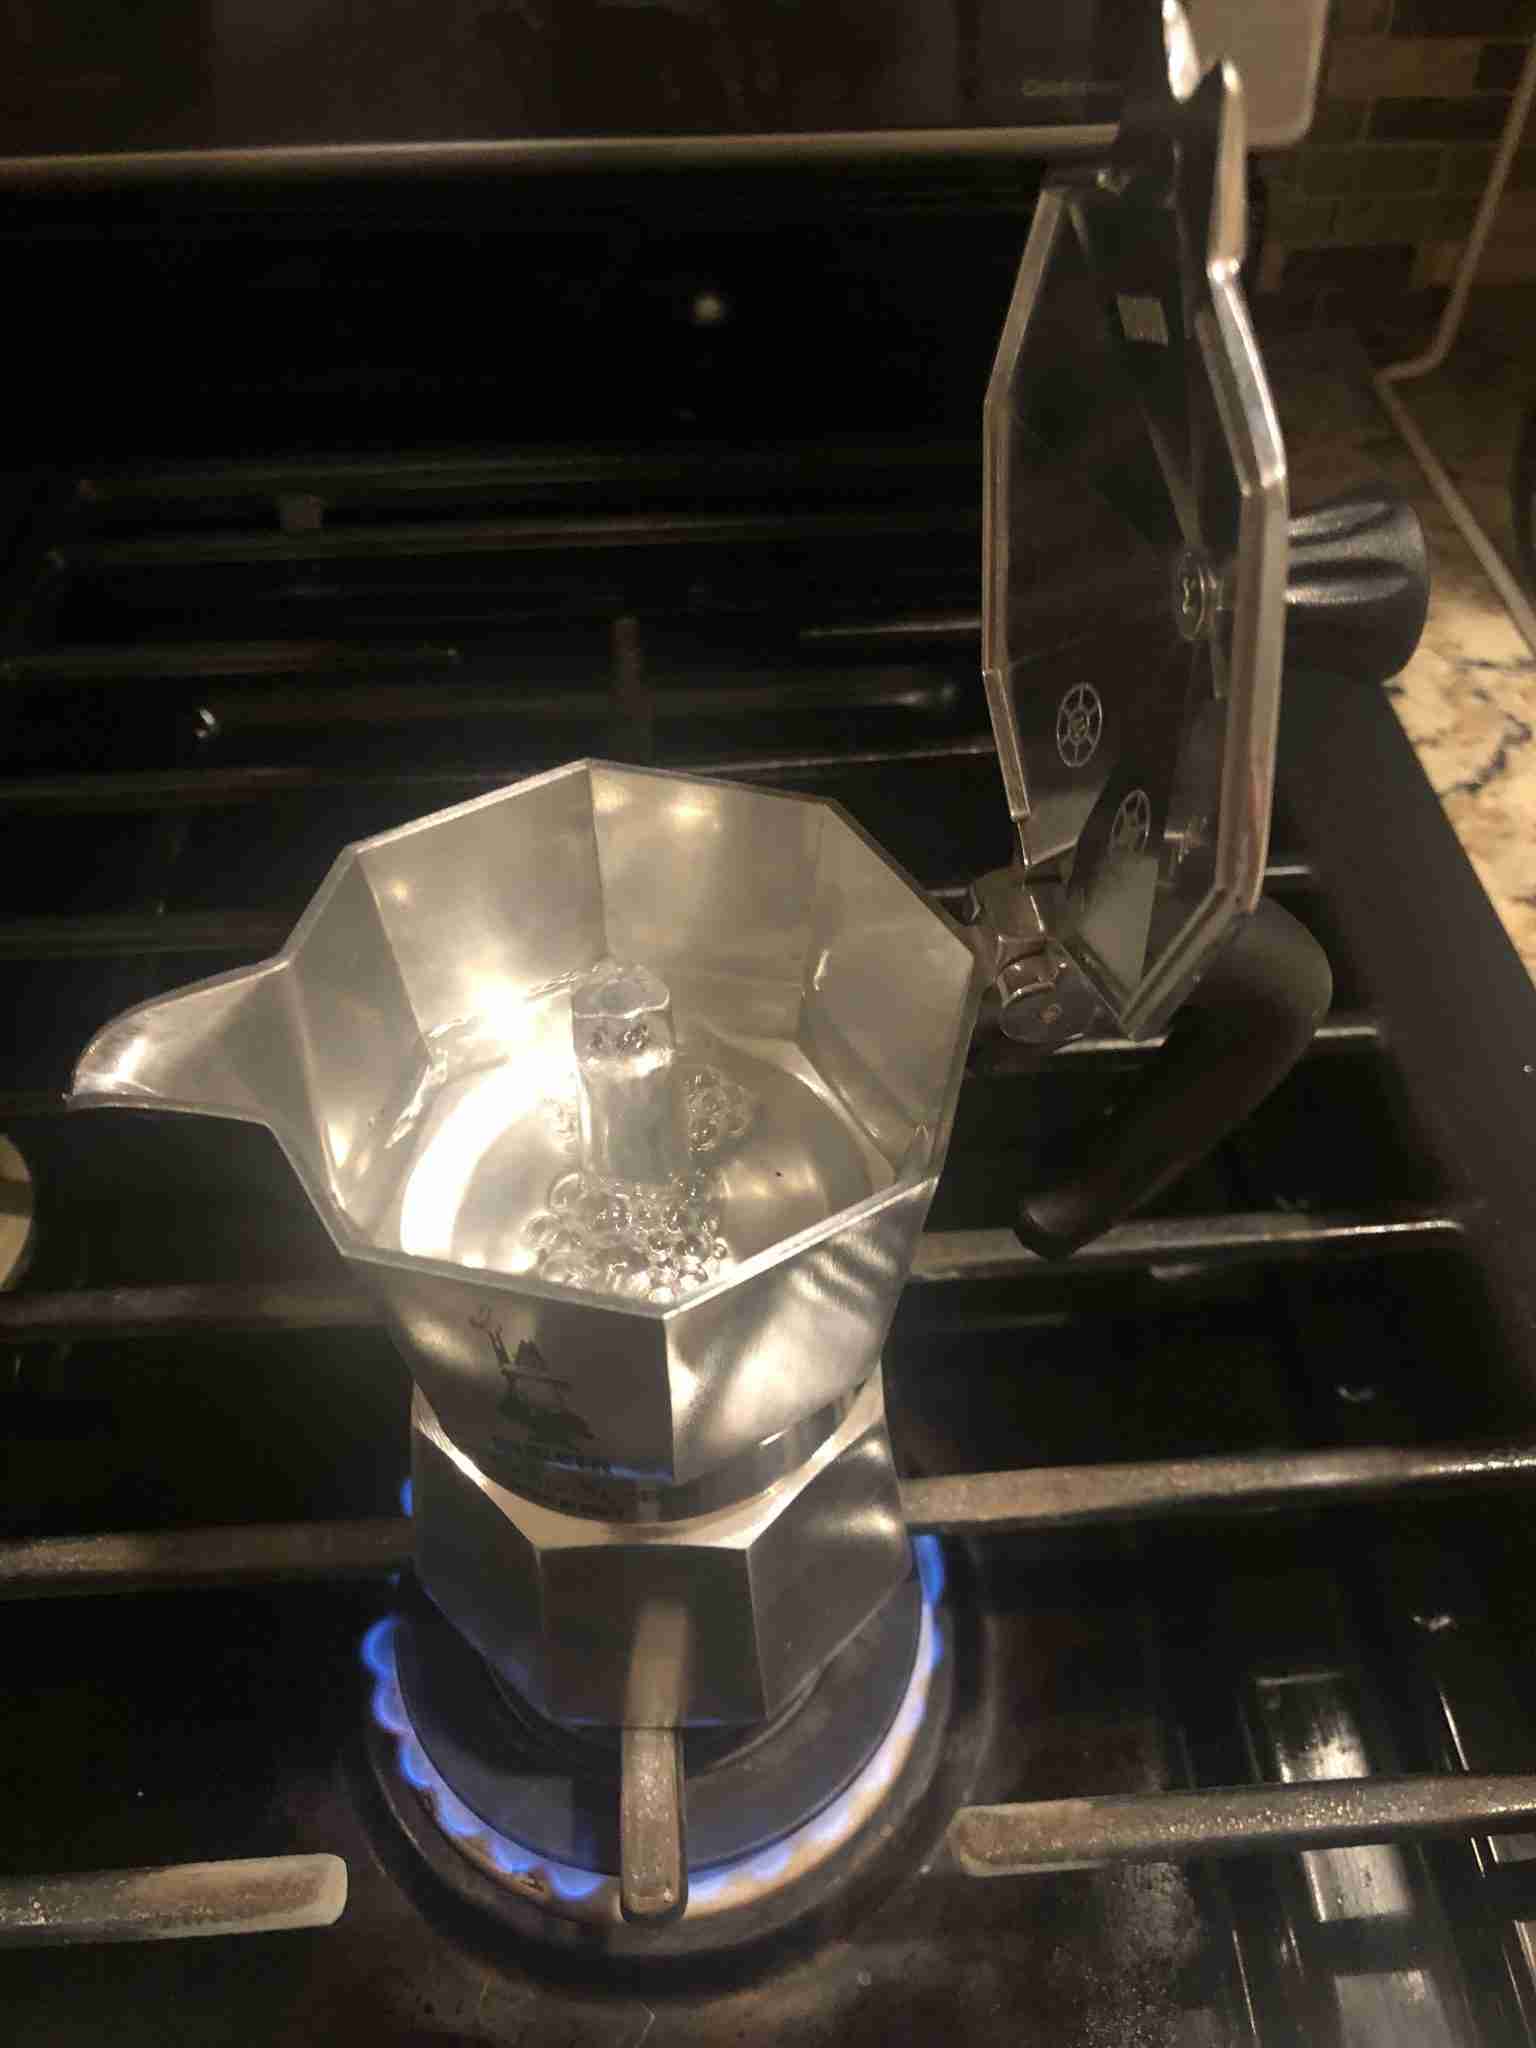 Cleaning stovetop espresso